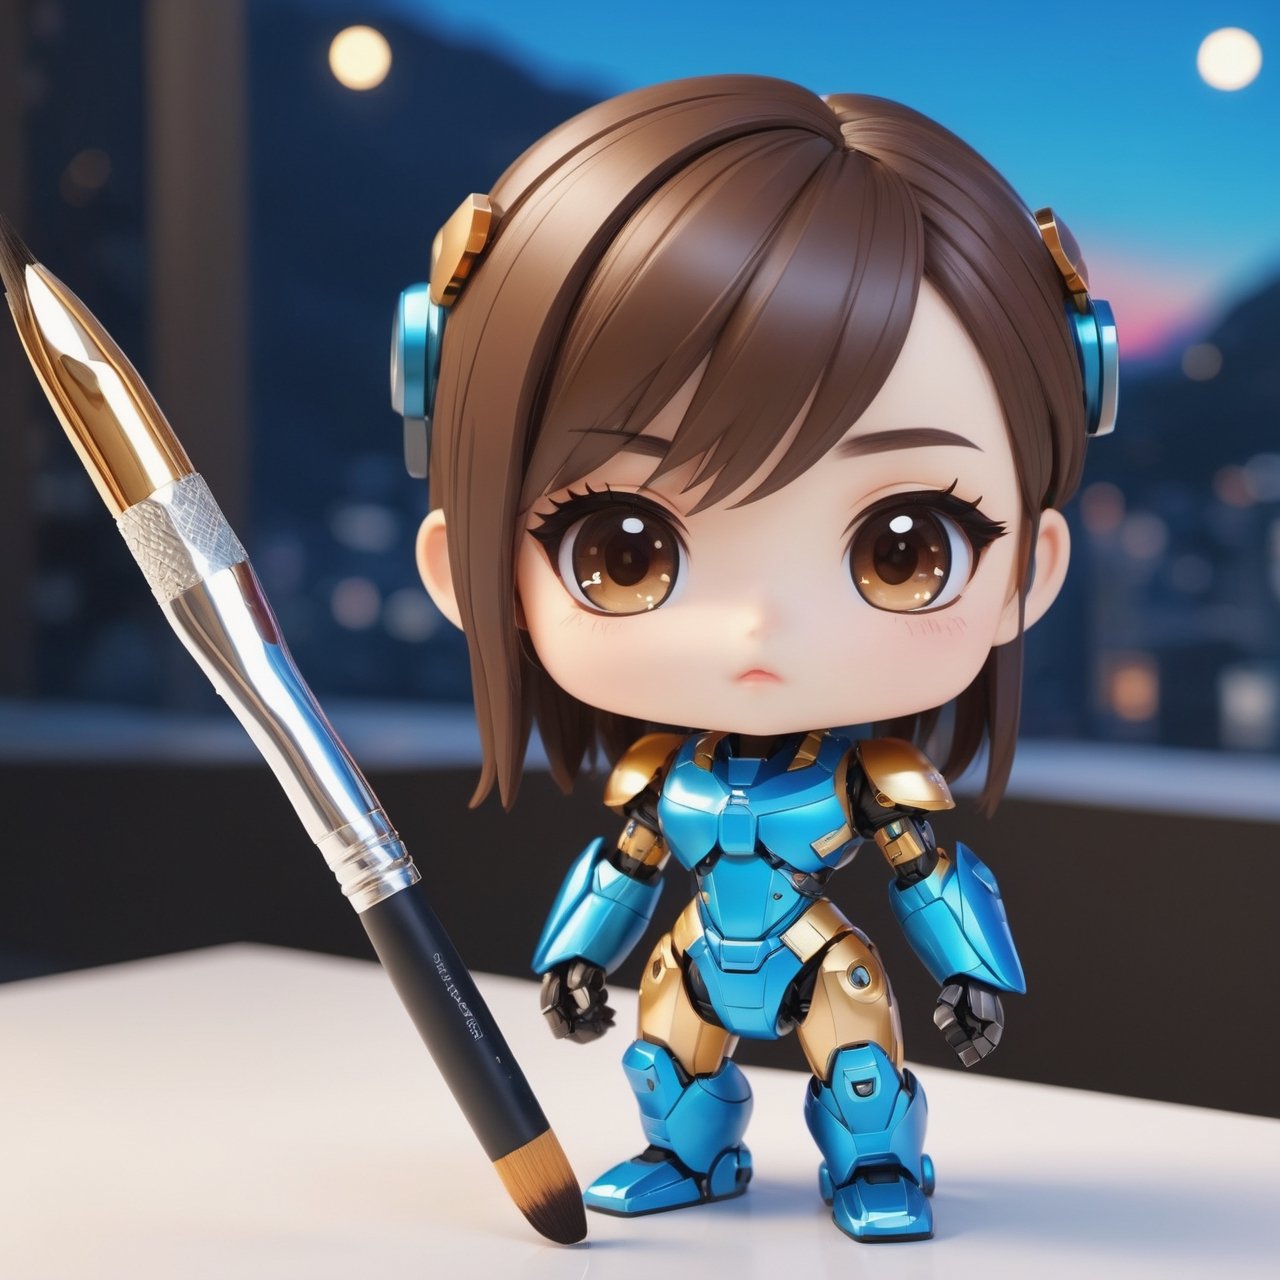 (masterpiece:1.2, highest quality), (realistic, photo_realistic:1.9)
1chibi_robot, Cute chibi robot, Designer look holding a paintbrush in one hand, white with blue, (detailed background), (gradients), colorful, detailed landscape, visual key, shiny skin. Modern place, Action camera. Portrait film. Standard lens. Golden hour lighting.
sharp focus, 8k, UHD, high quality, frowning, intricate detailed, highly detailed, hyper-realistic,interior,koola Chibi,chibi emote style